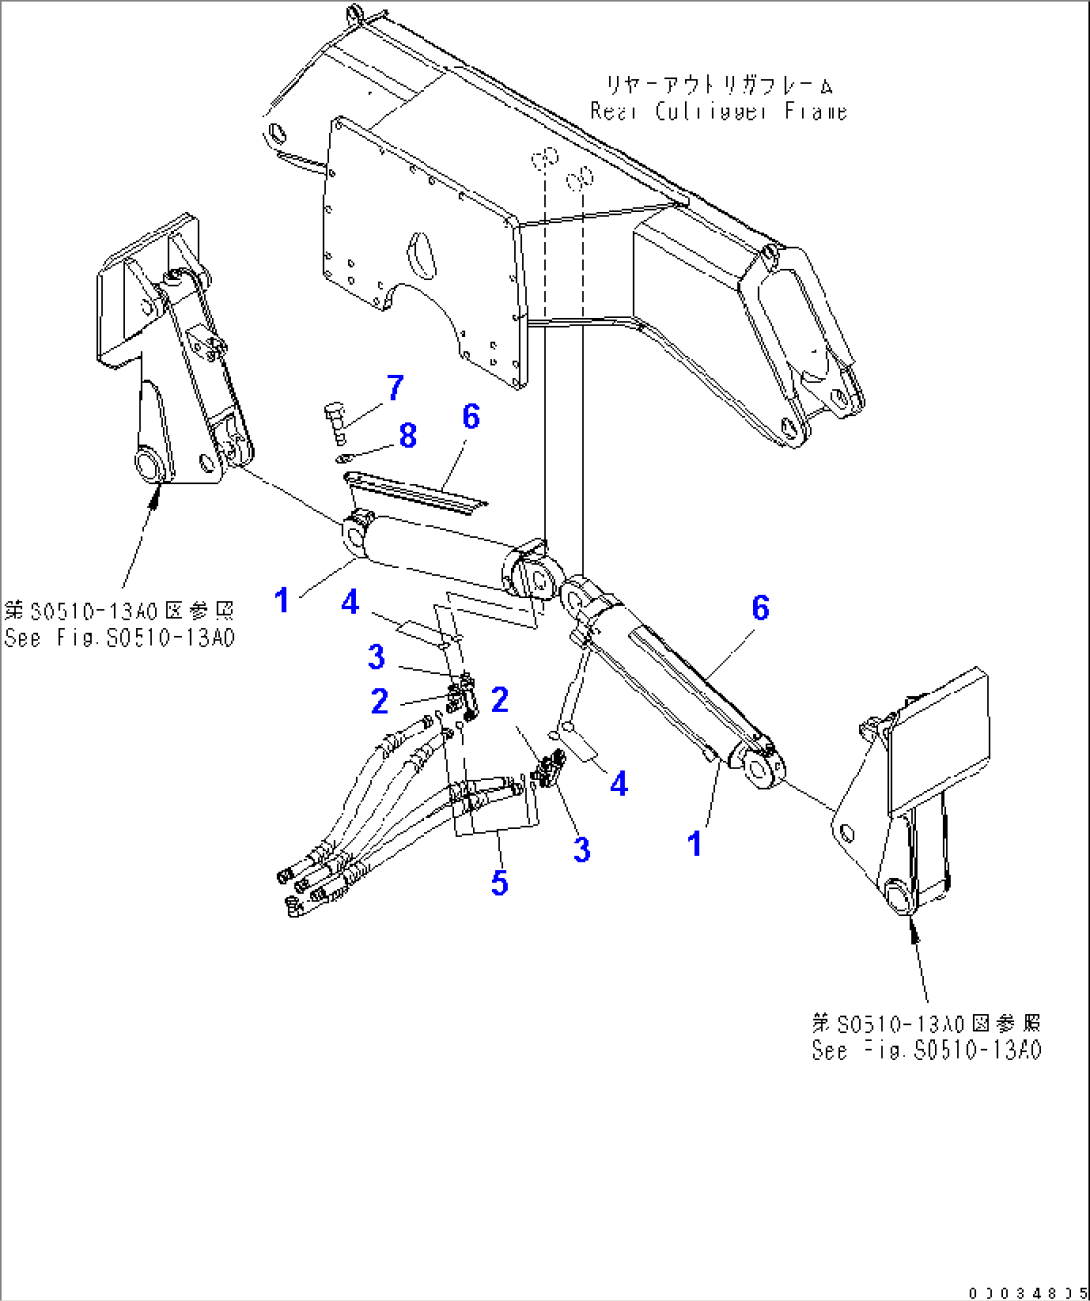 REAR OUTRIGGER (OUTRIGGER CYLINDER)